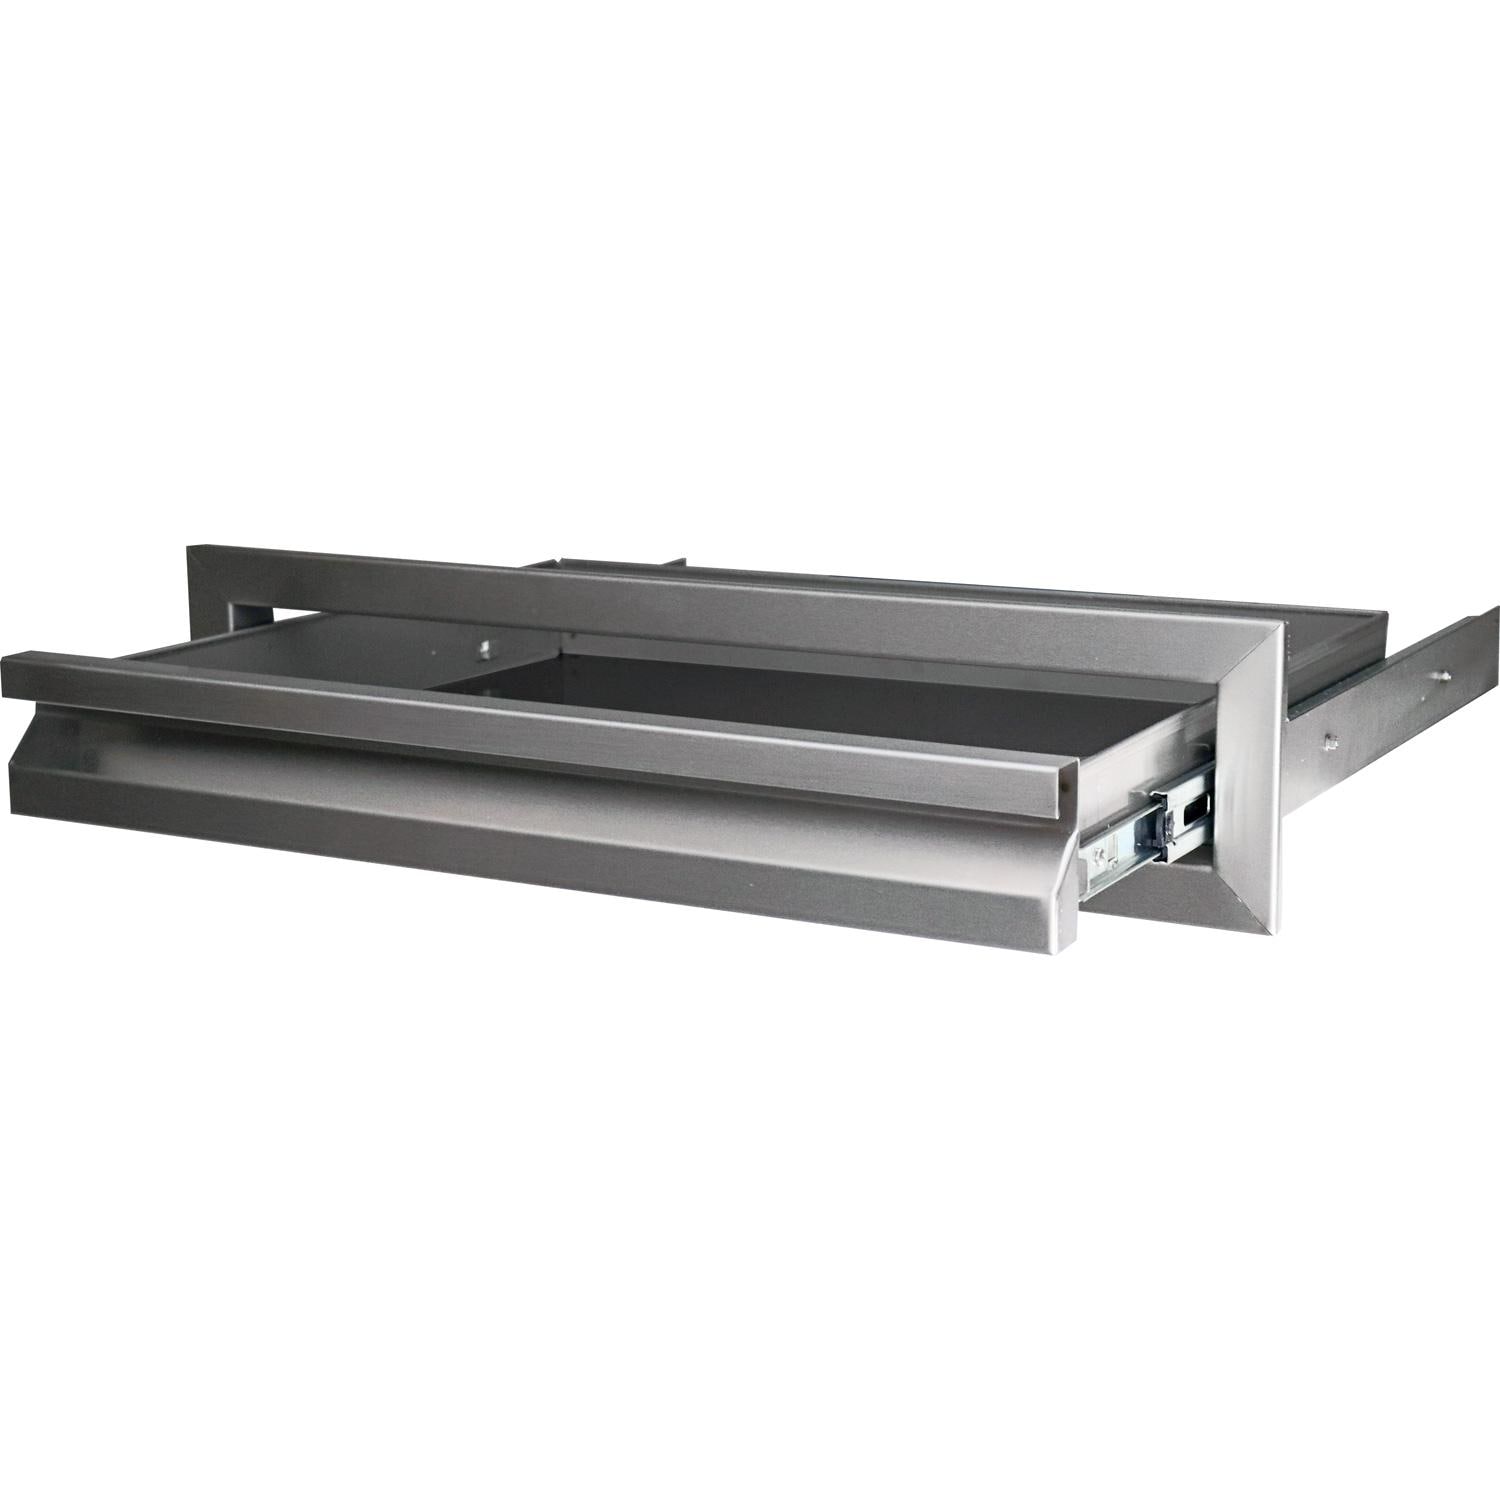 RCS Valiant Series 25 X 6-Inch Stainless Steel Single Access Drawer - VDU1 - image 2 of 2